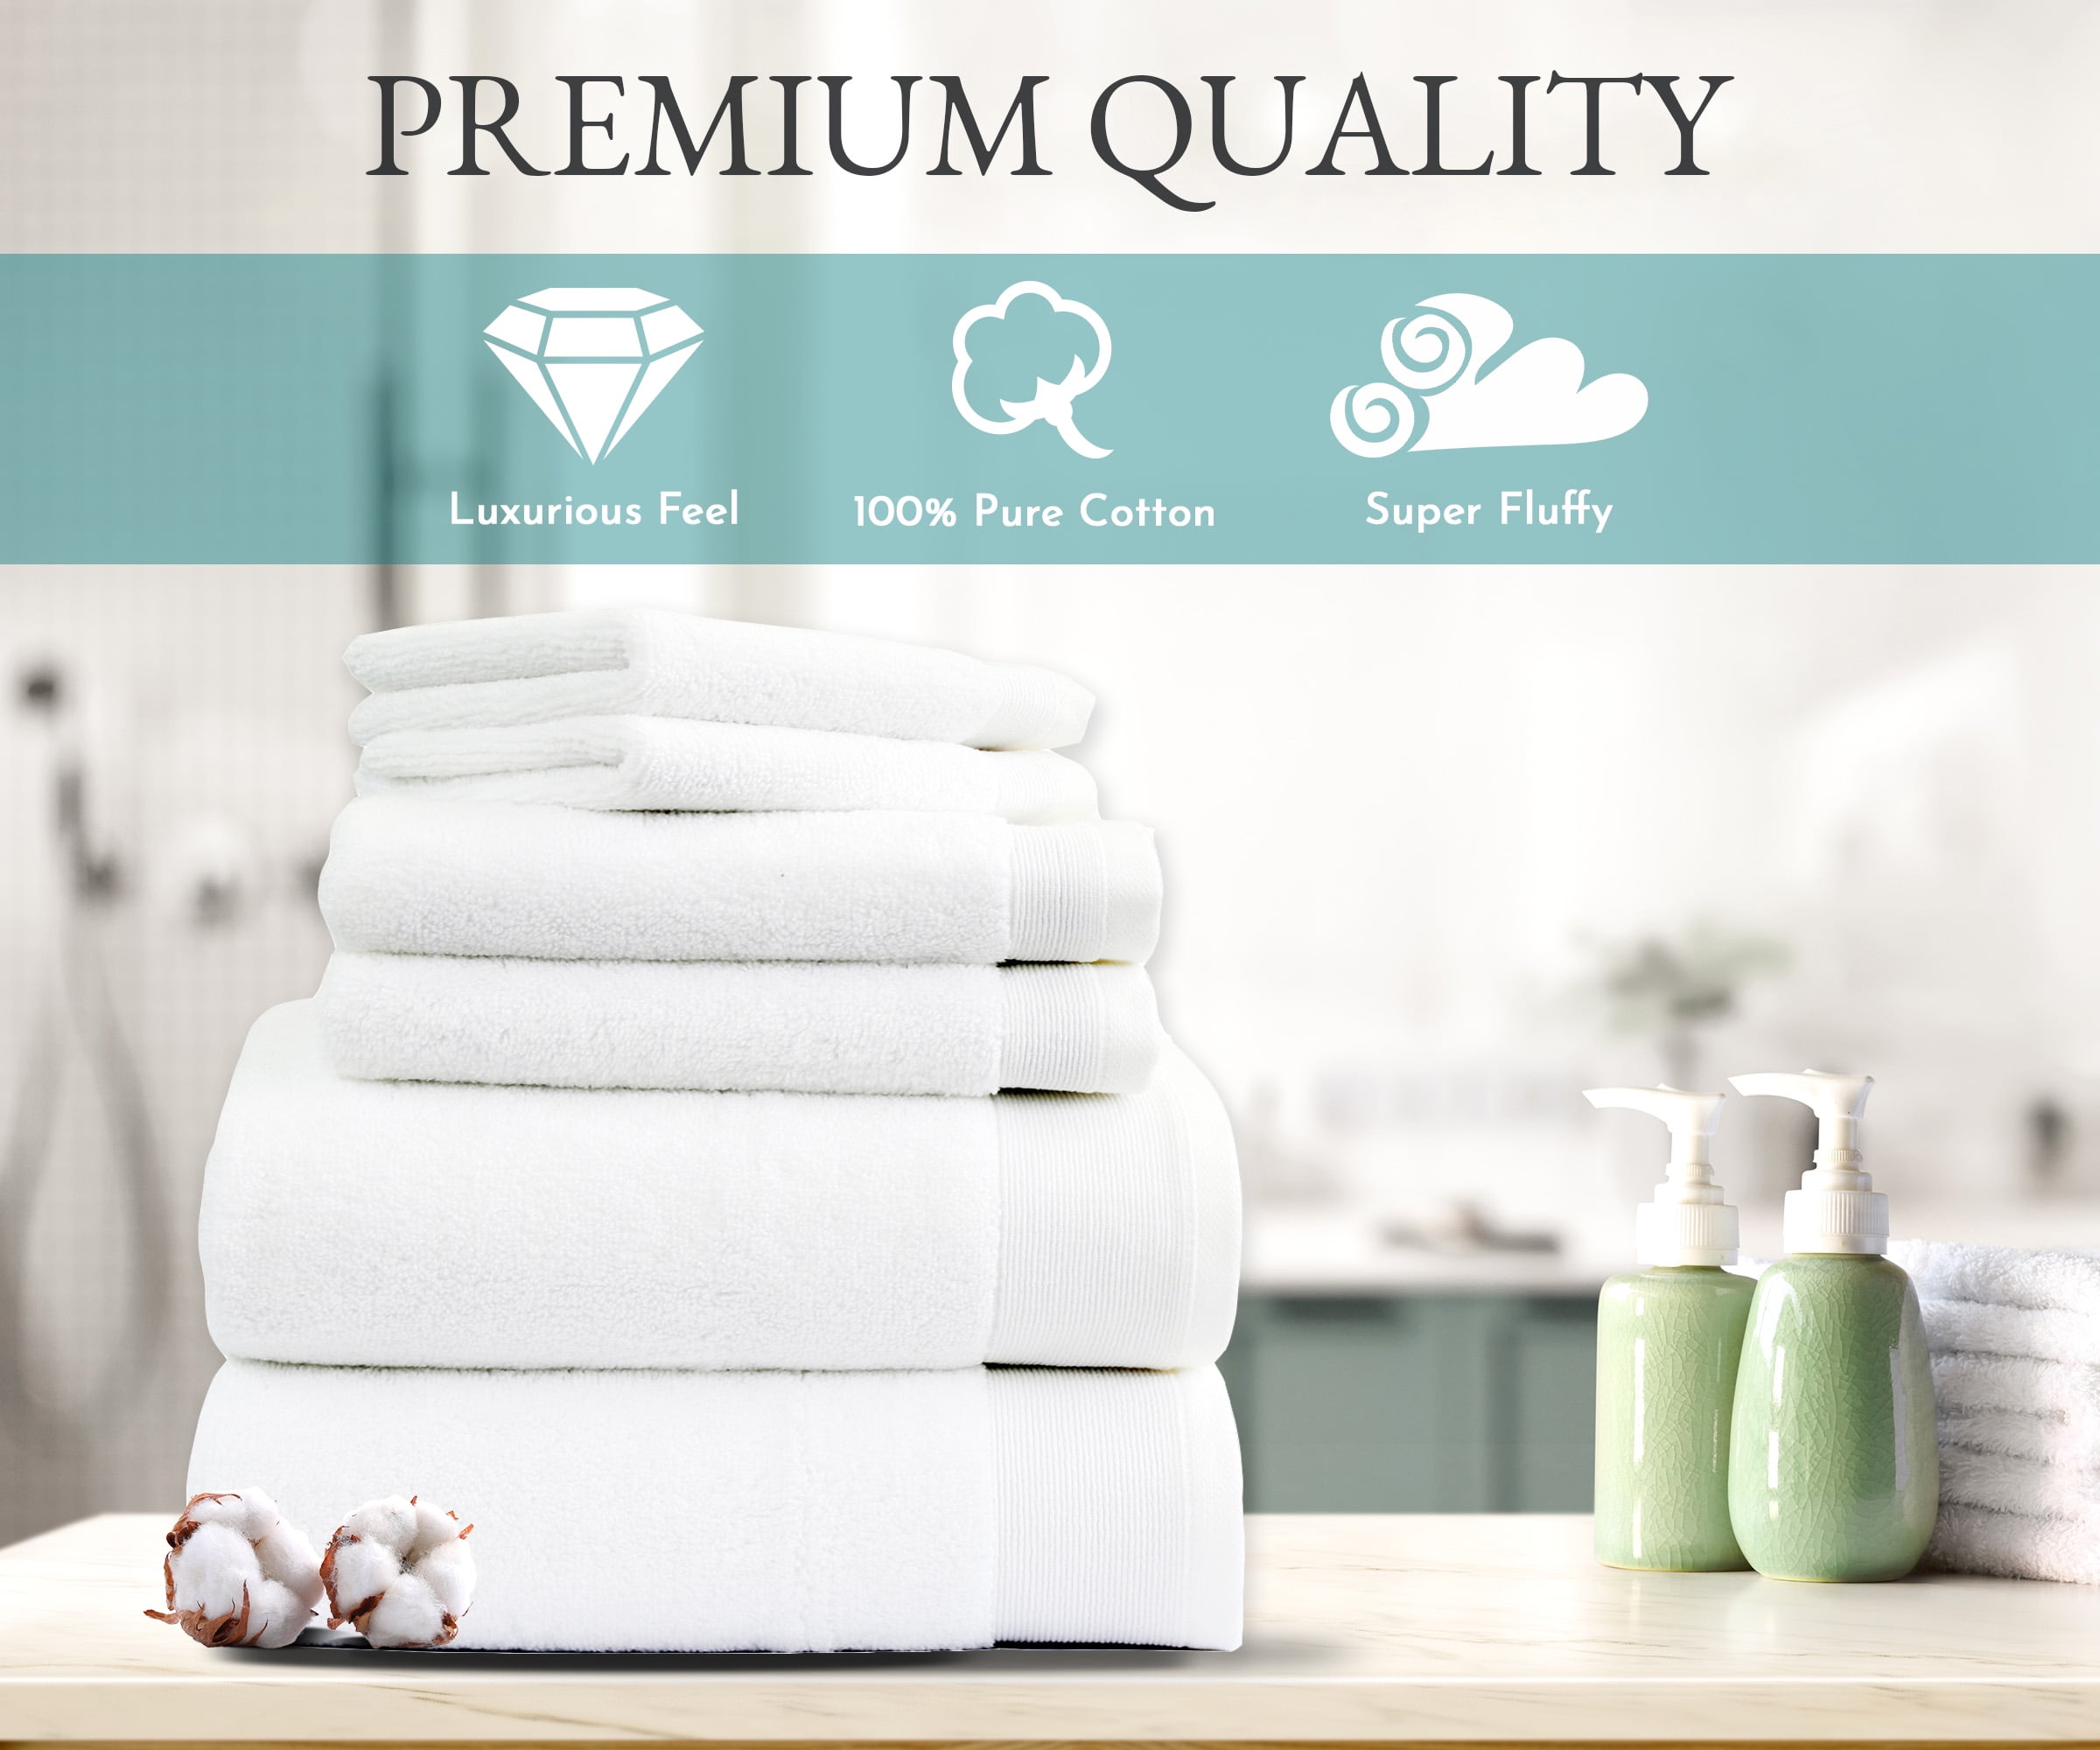 Luxury 6 Piece Hotel and SPA Towel Set Soft and Thick Bath Towels